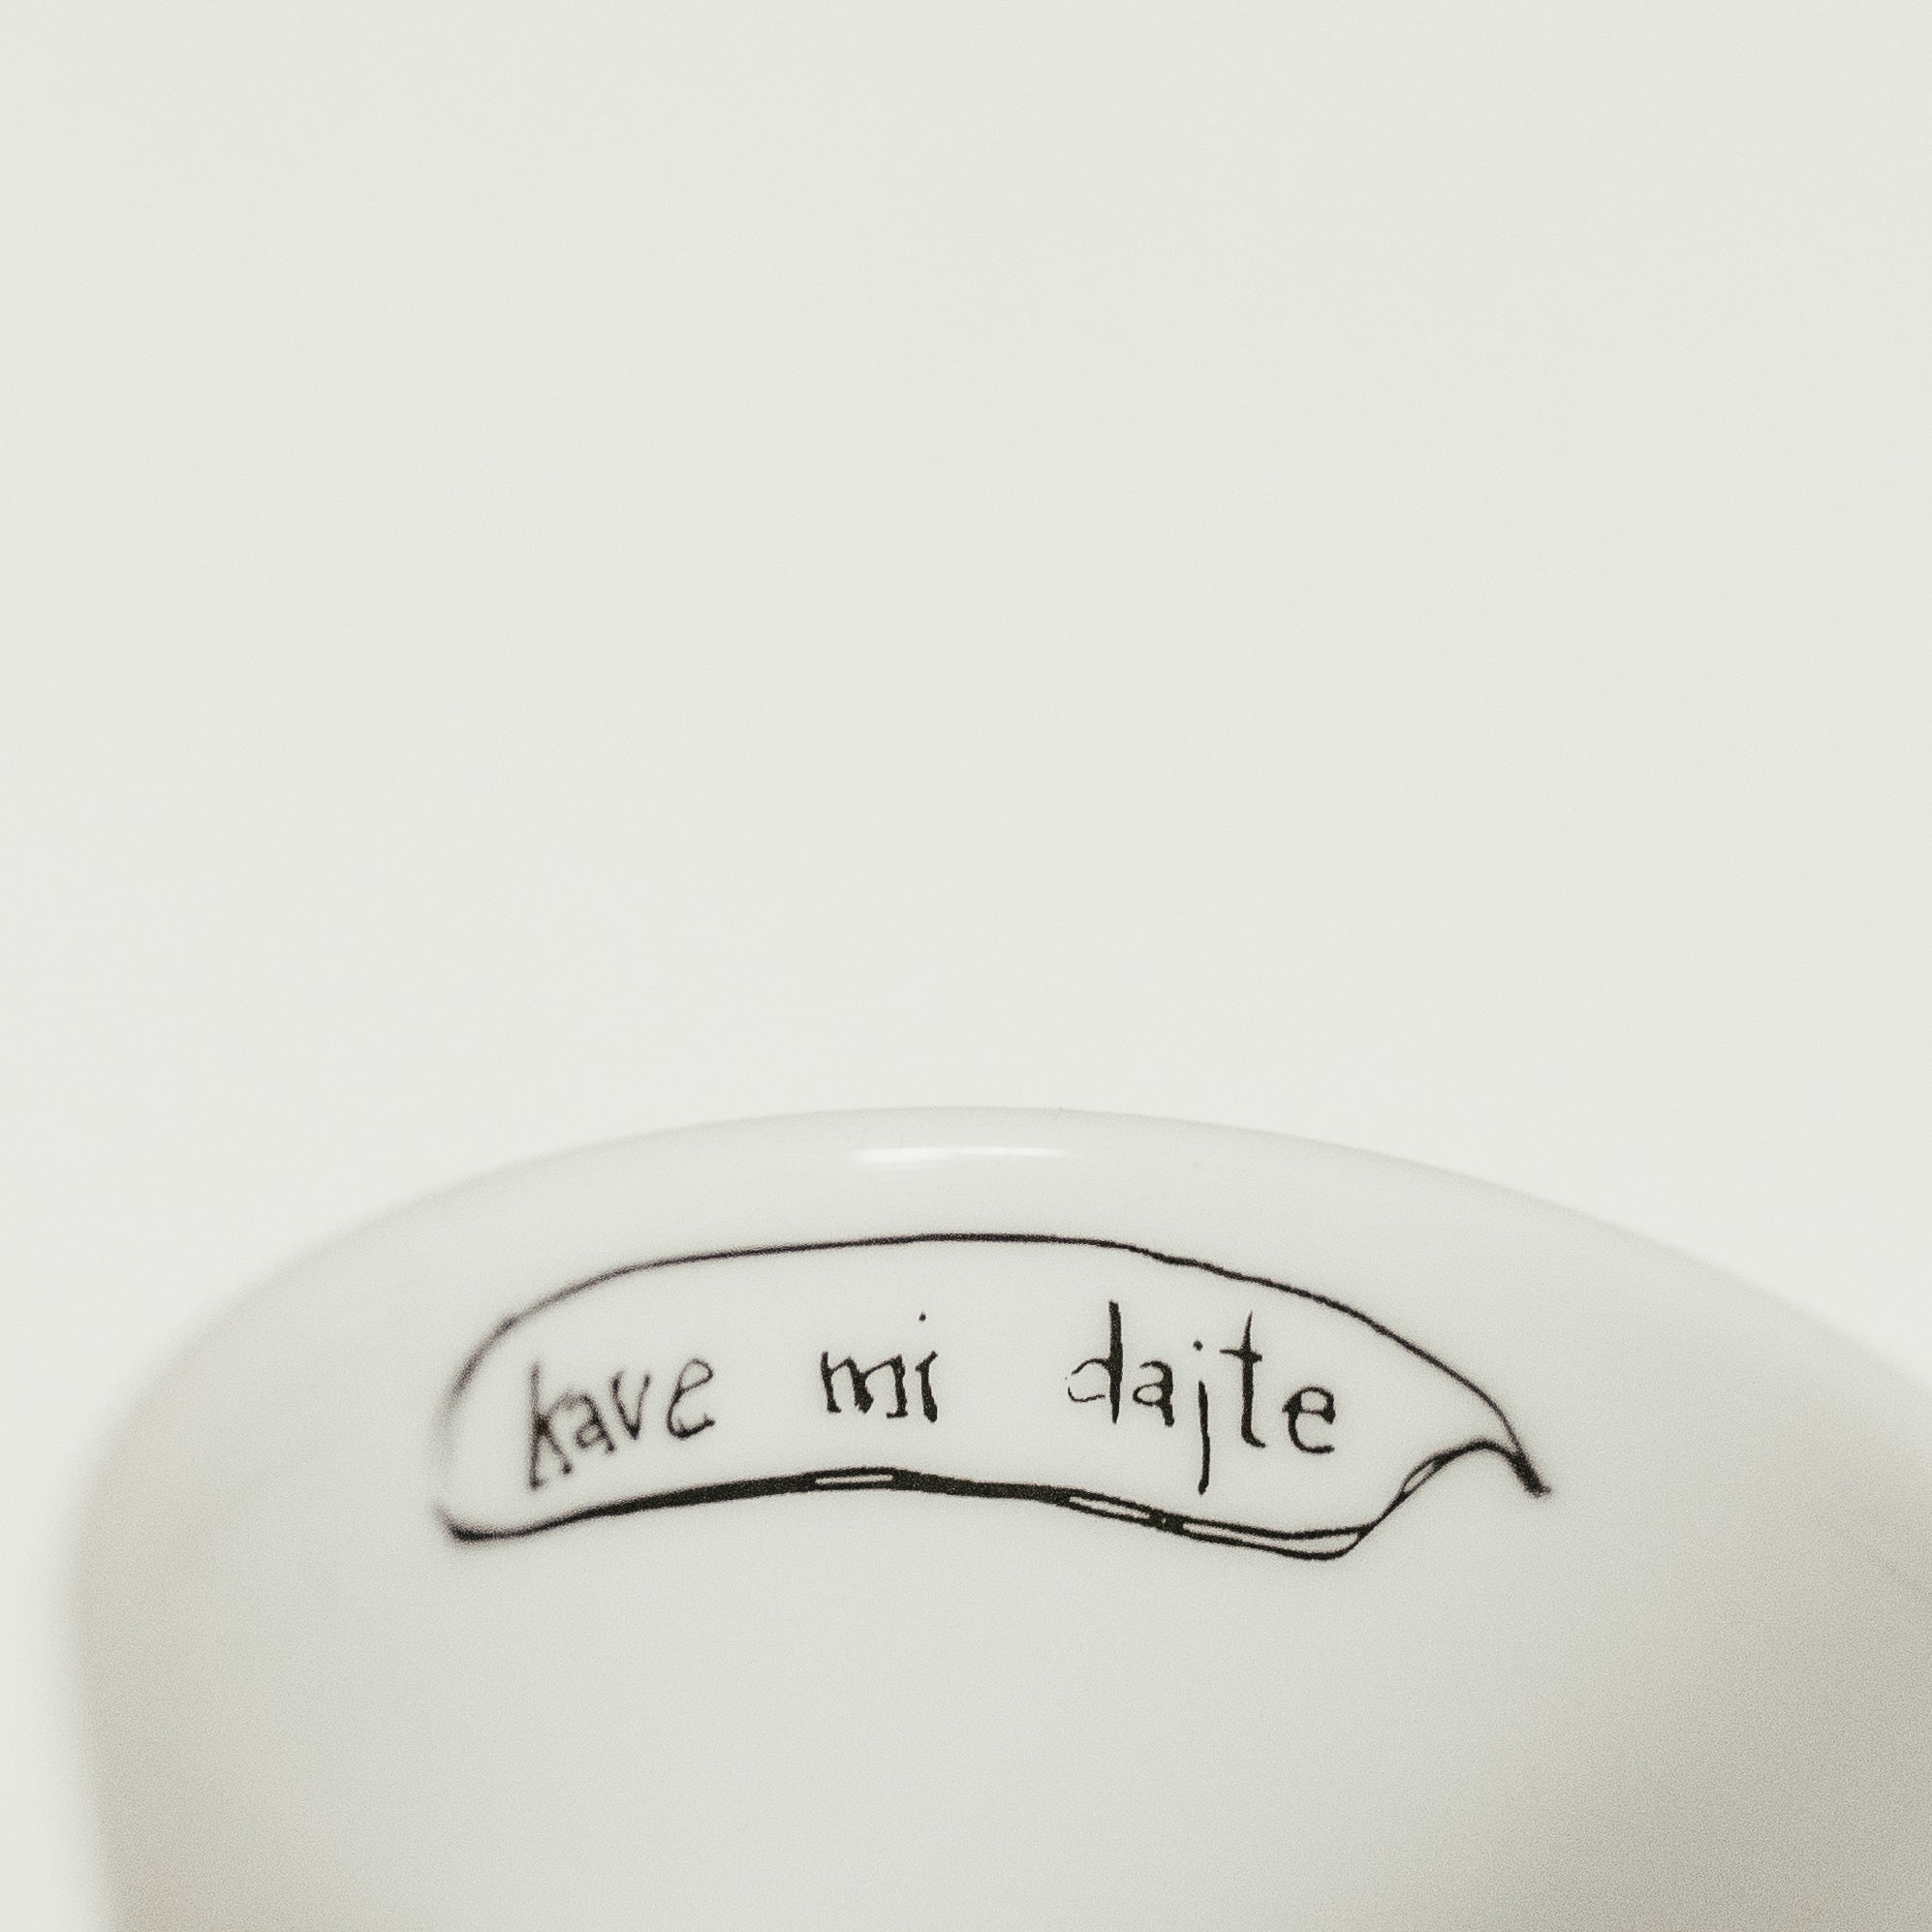 Porcelain cup inspired by Ivan Cankar text inside of the cup